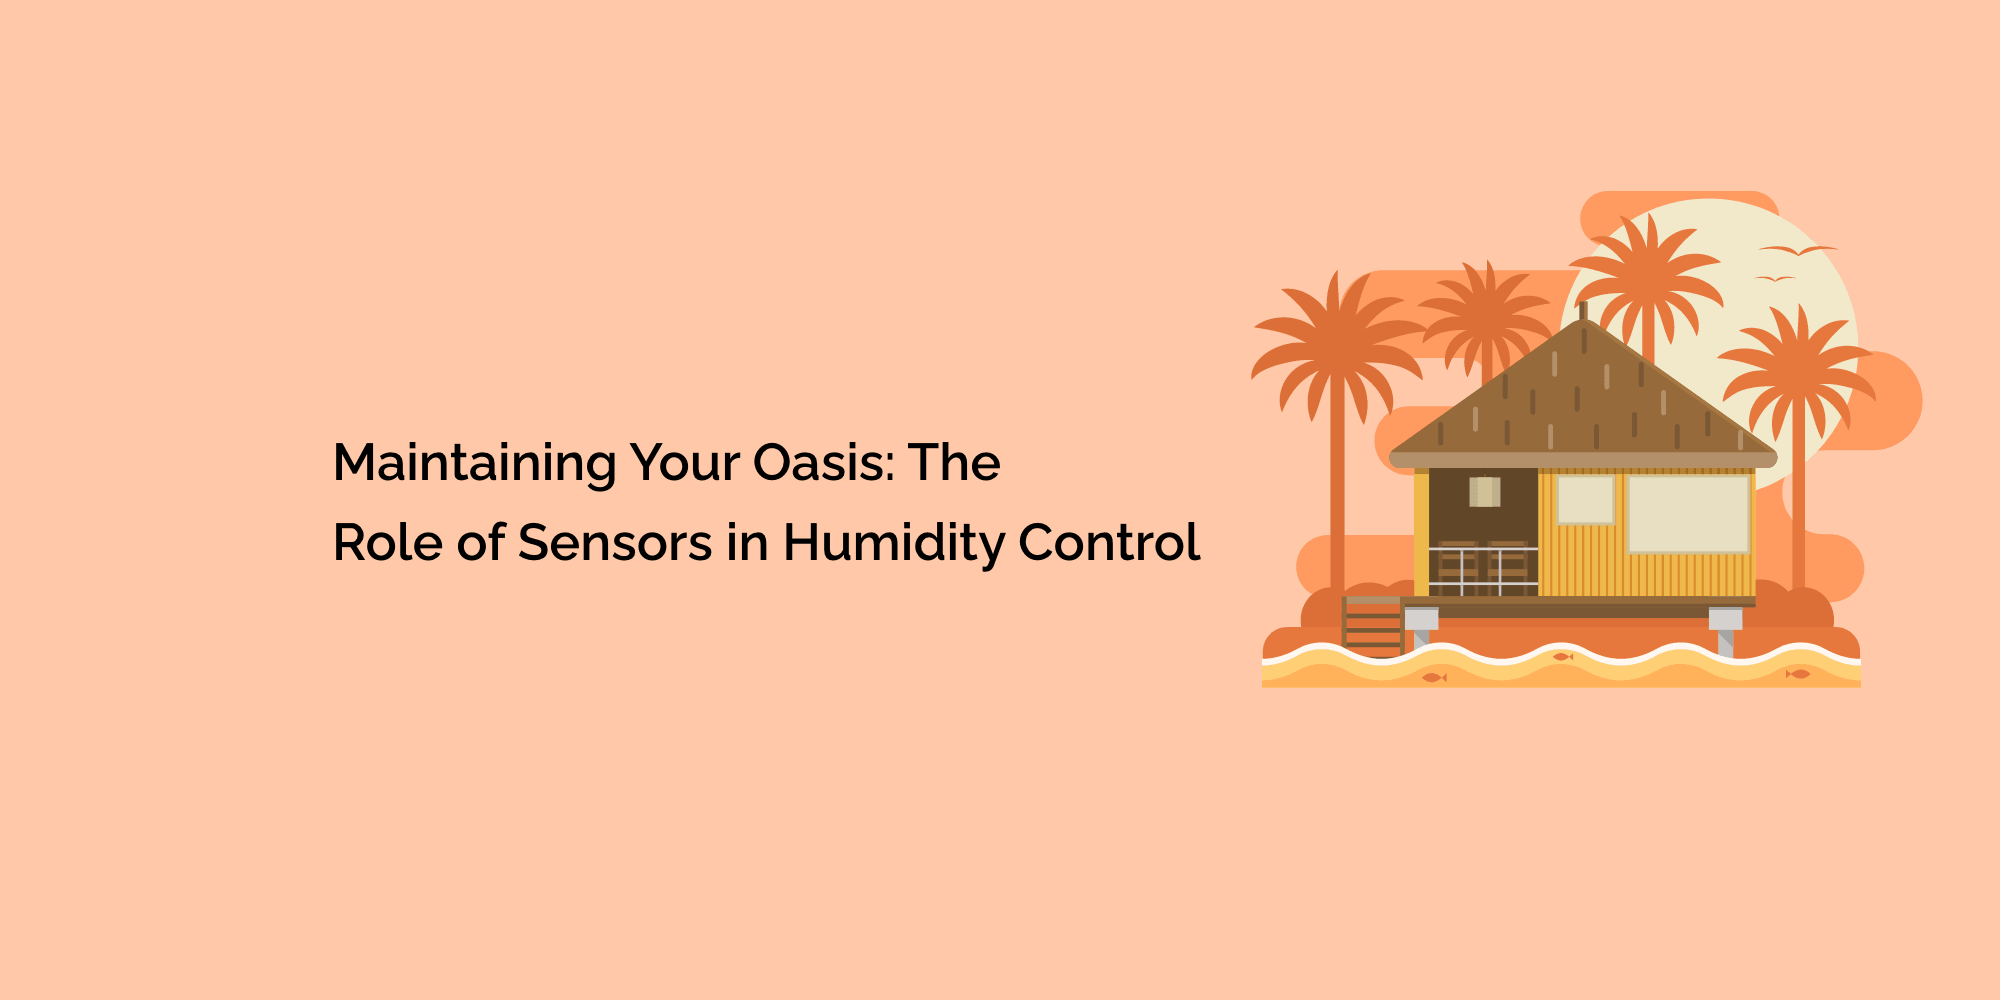 Maintaining Your Oasis: The Role of Sensors in Humidity Control